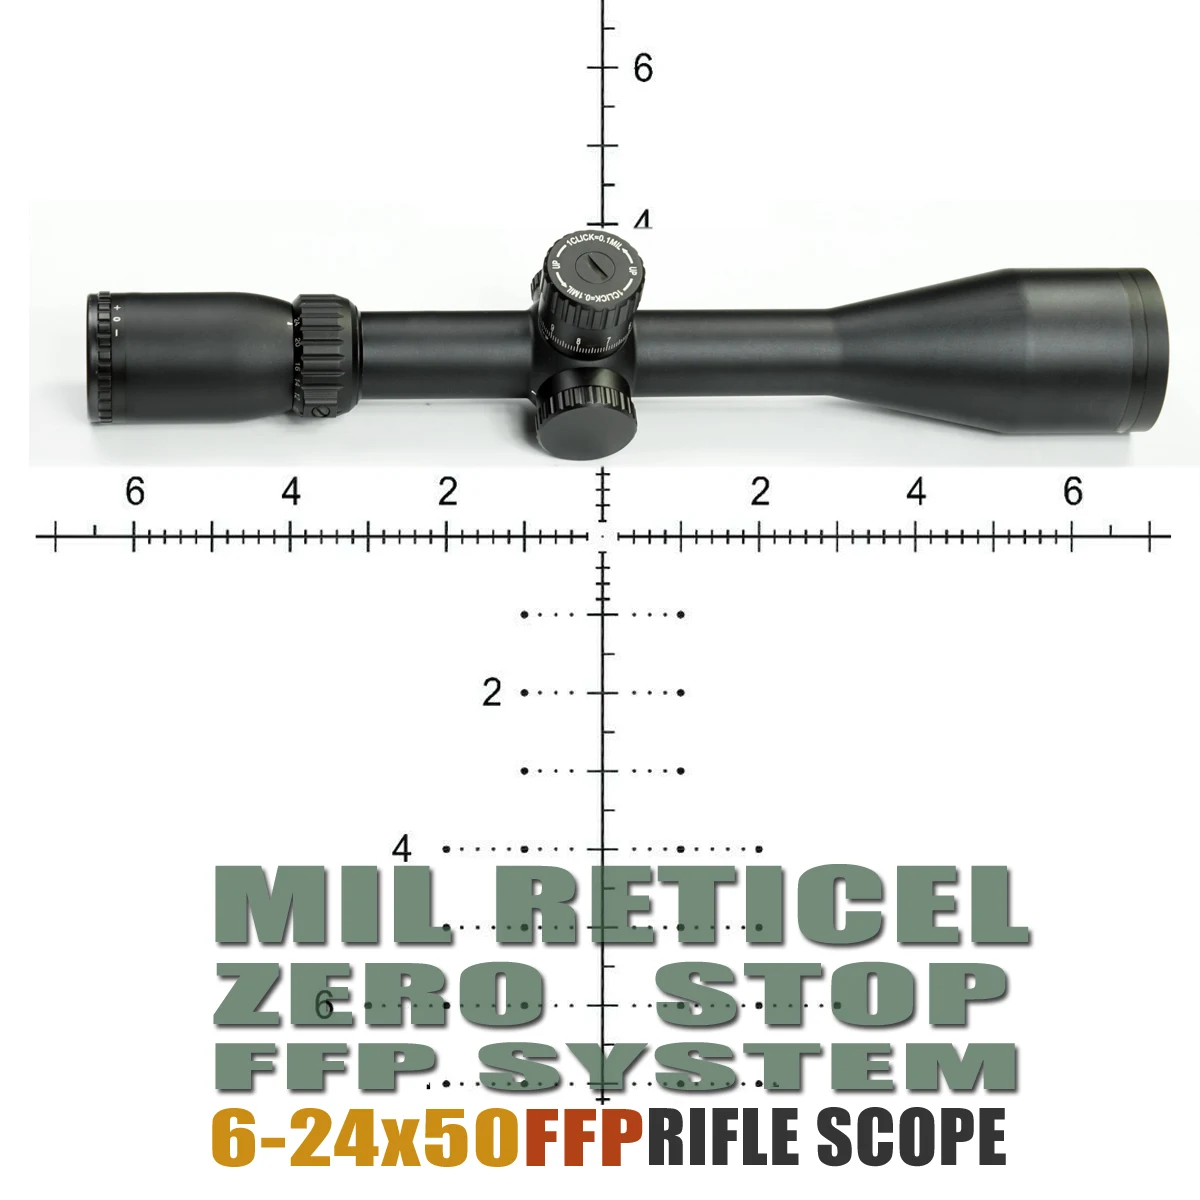 

Long Range Rifle Scope, First Focal Plane, 308, 338 Hunting Tactics, MIL Reticle, Zero Stop, 6-24x50FFP, Free Shipping